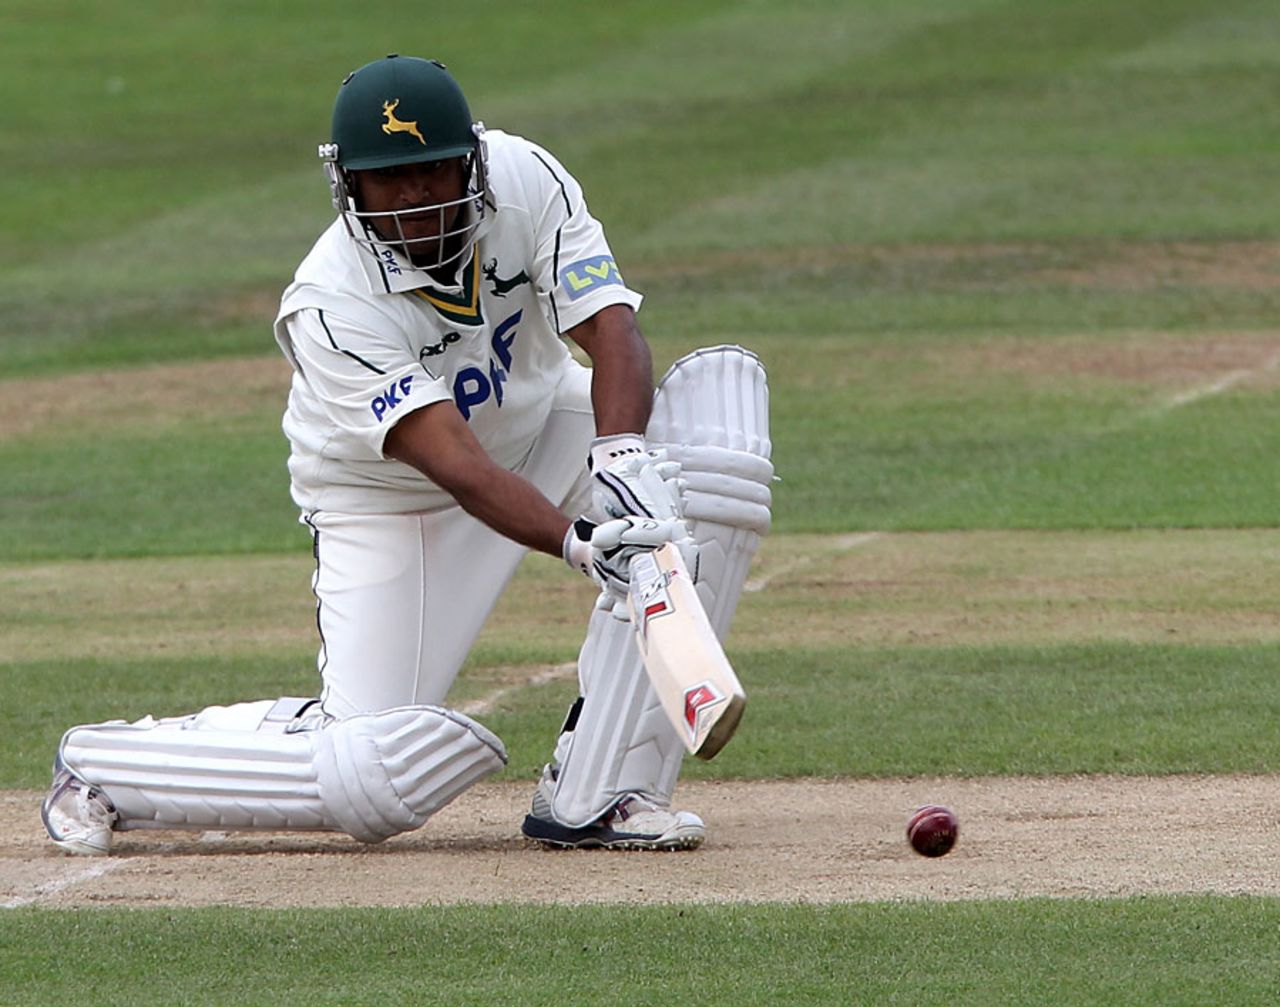 Samit Patel struck two boundaries to help Nottinghamshire knock off the target and complete a 10-wicket win, Warwickshire v Nottinghamshire, Edgbaston, 3rd day, July 22, 2010